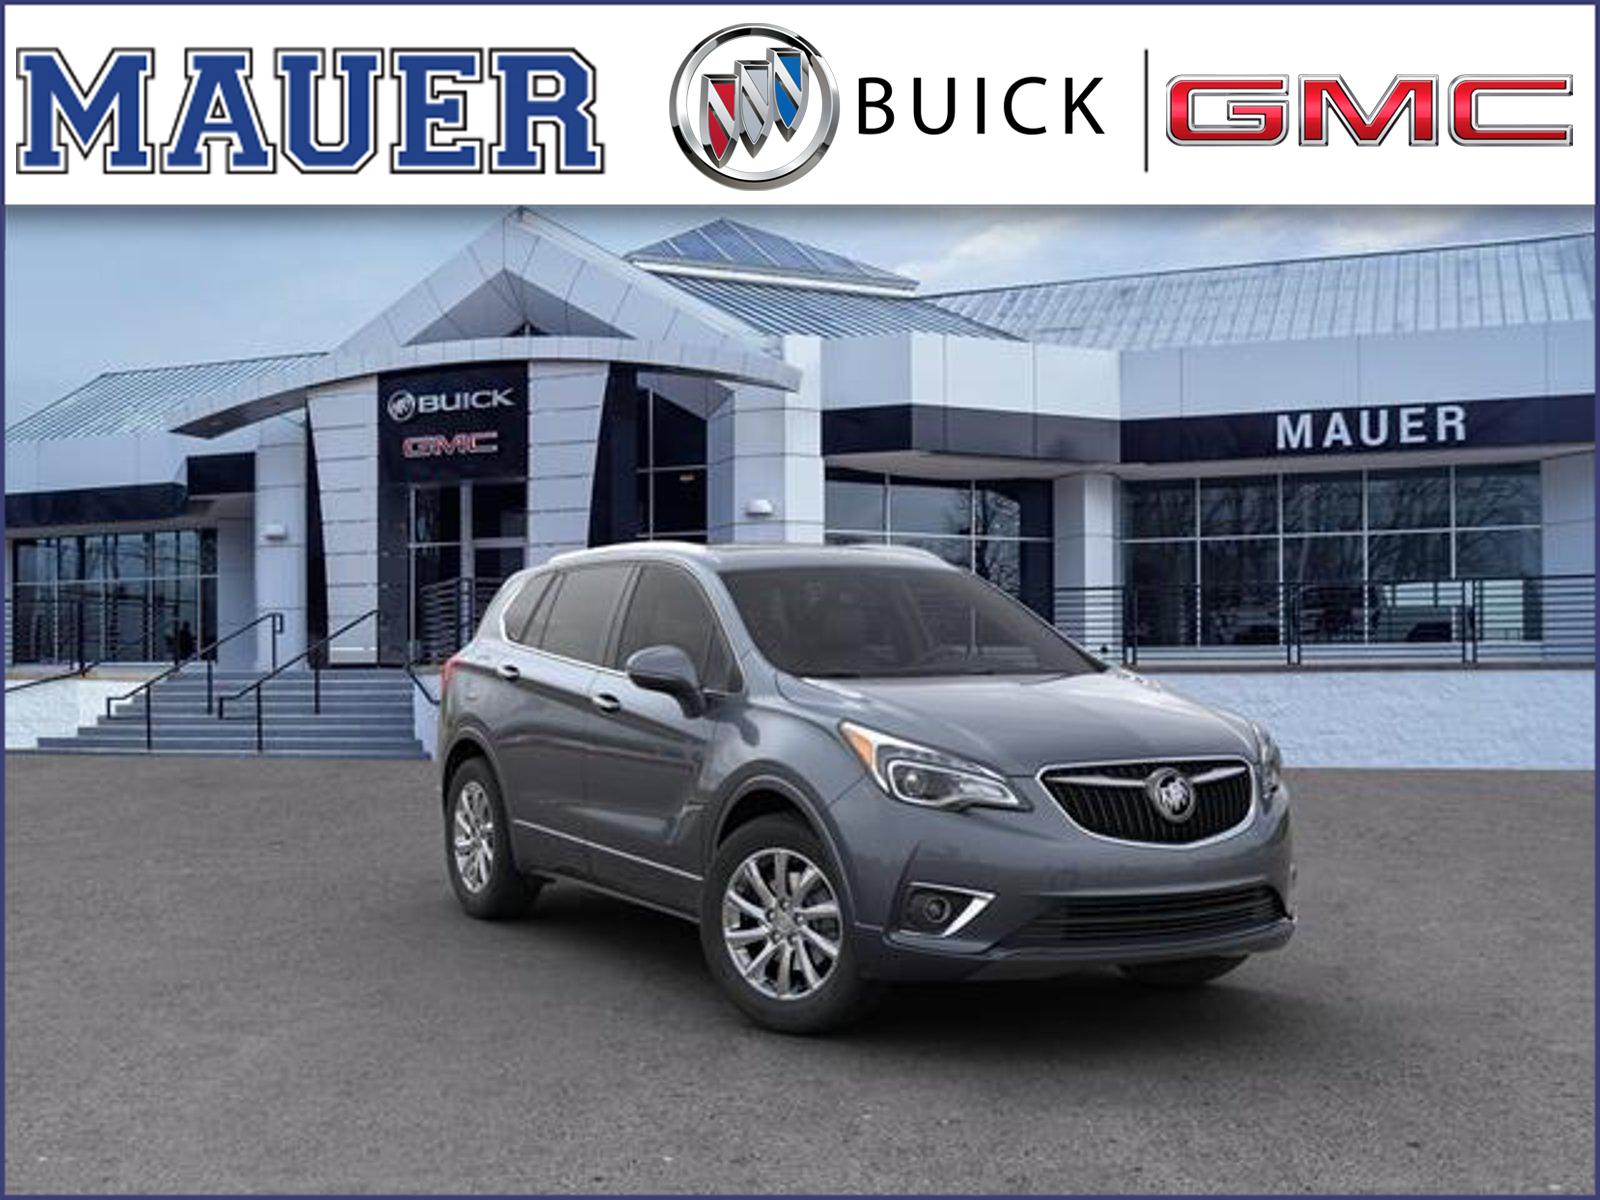 Pre-Owned 2020 Buick Envision Essence SUV in Inver Grove Heights #20071R |  Mauer Buick GMC